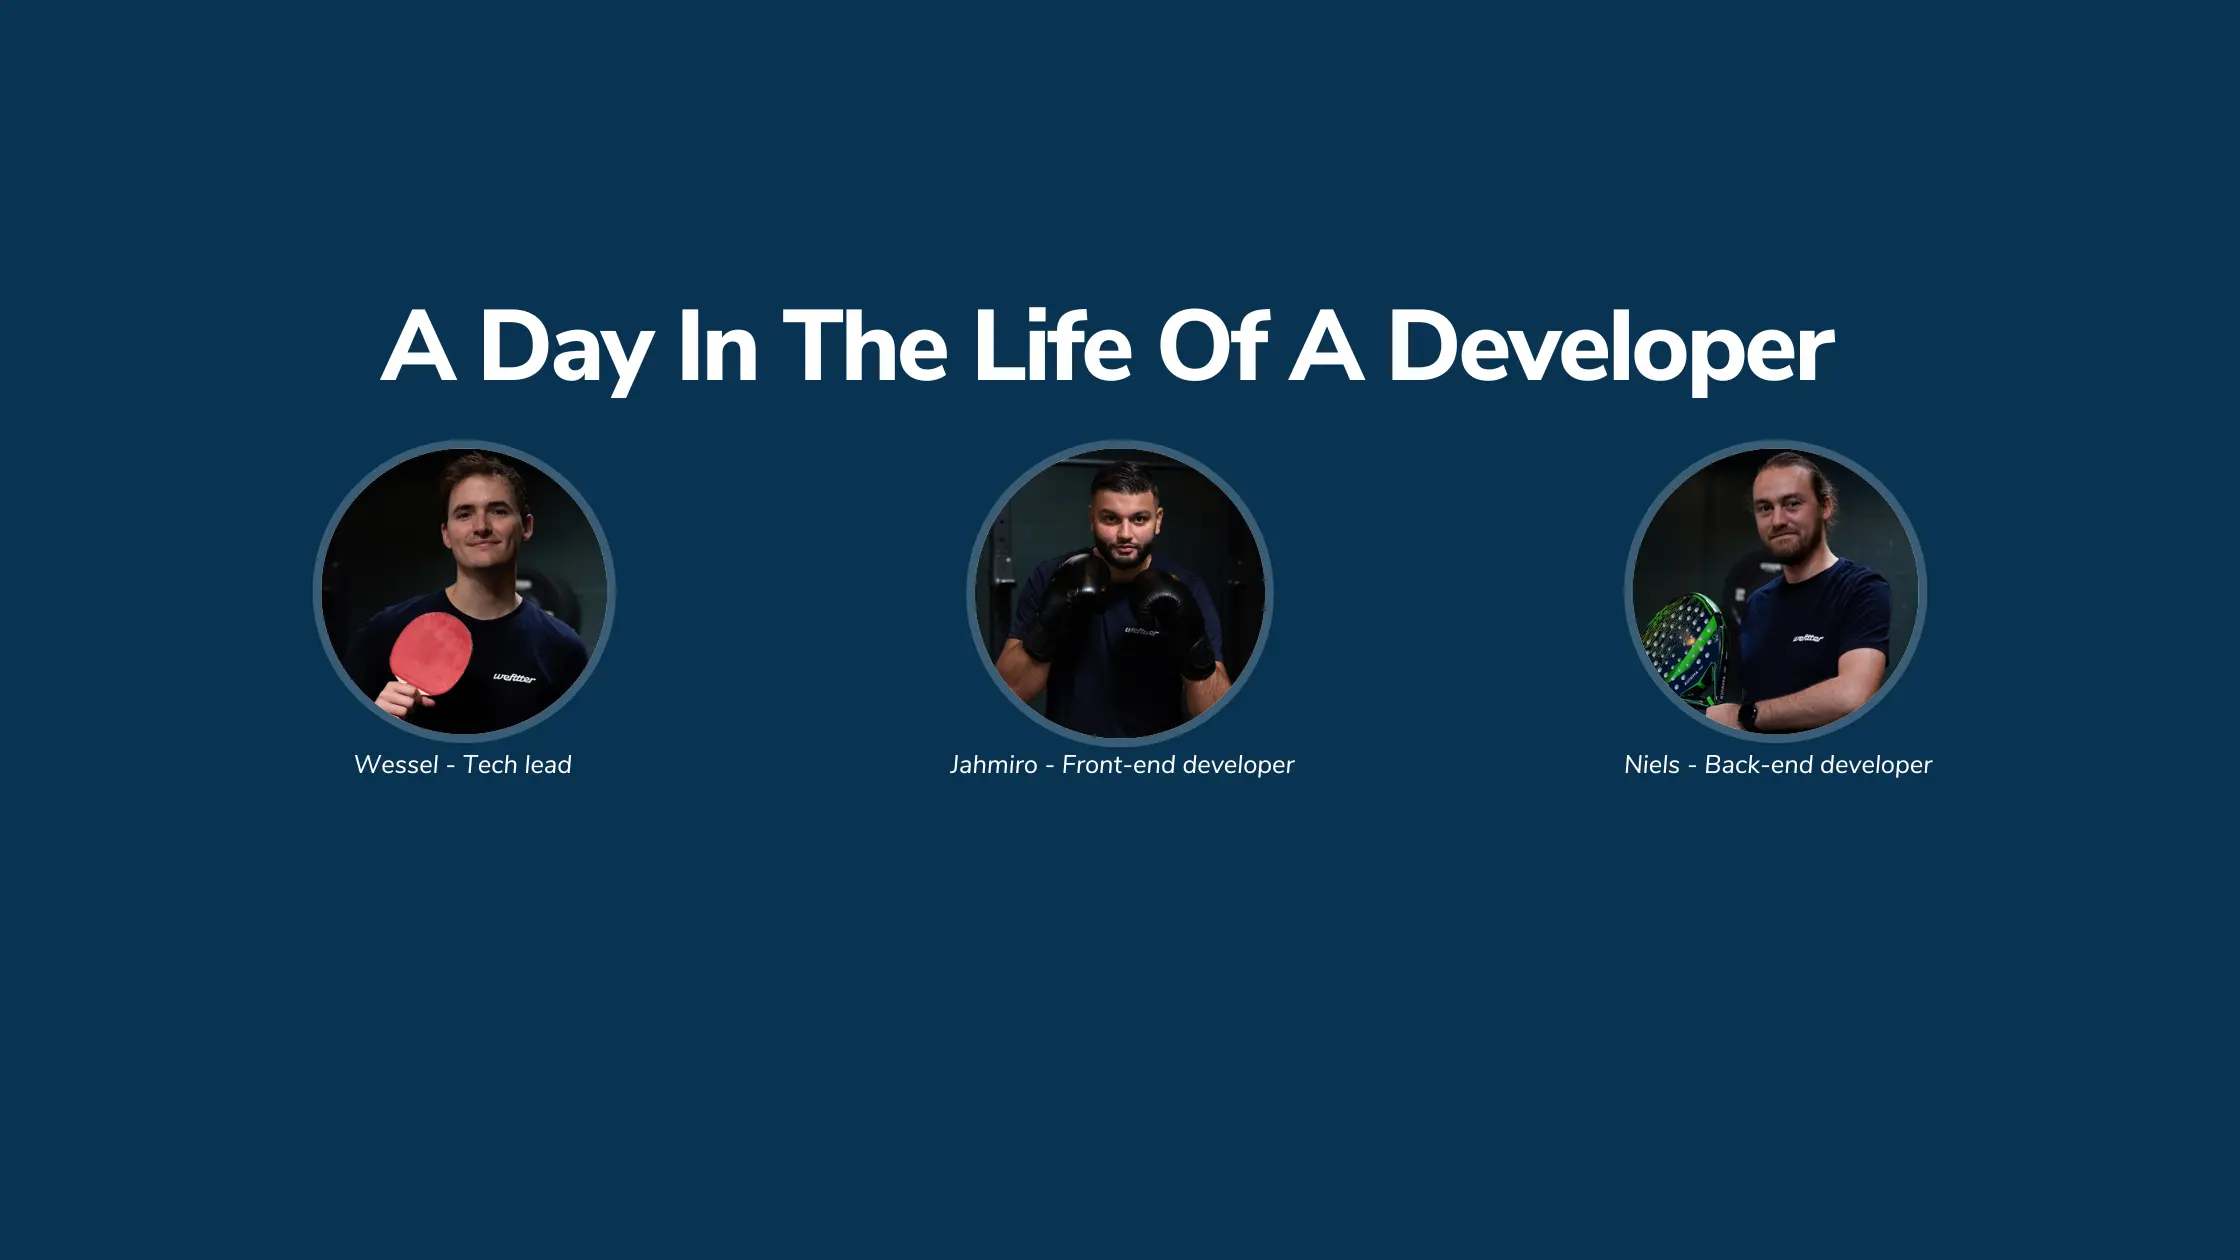 A day in the life of a developer